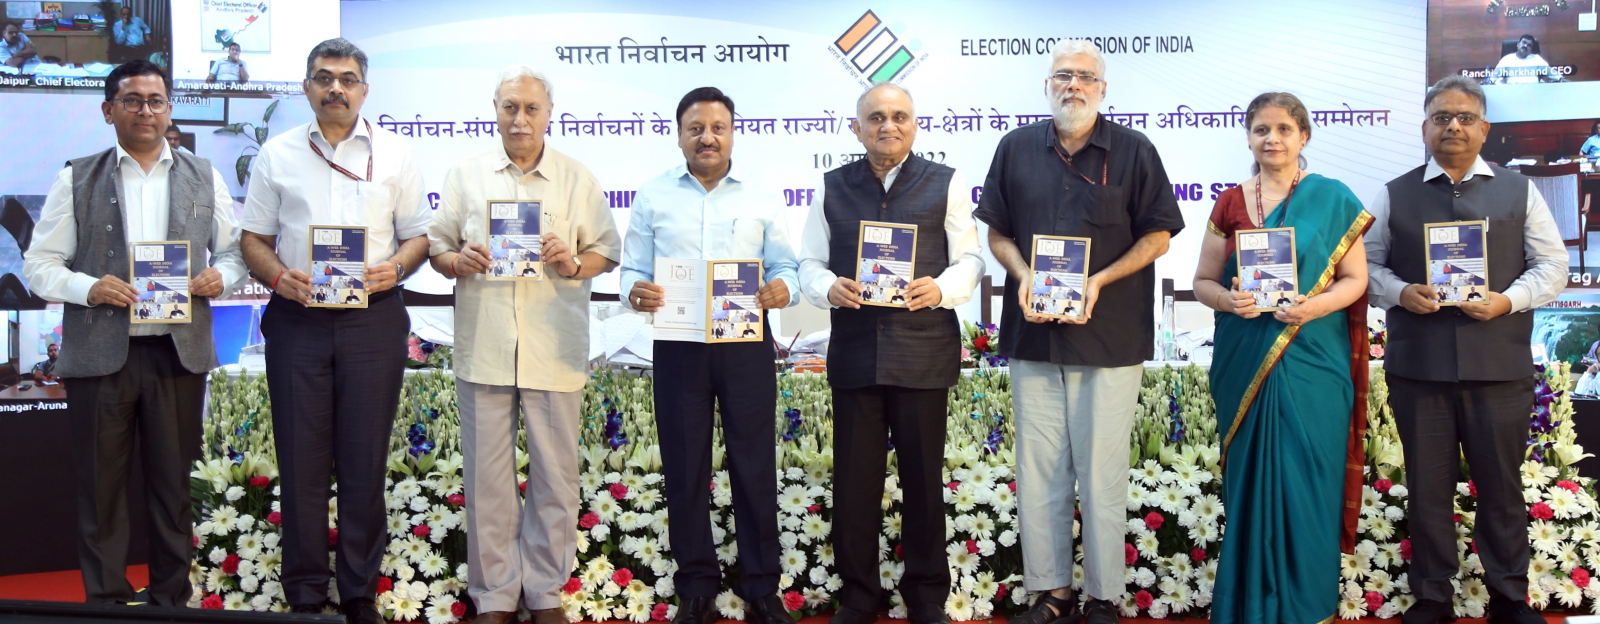 Release of the latest edition of A-WEB India Journal of Elections